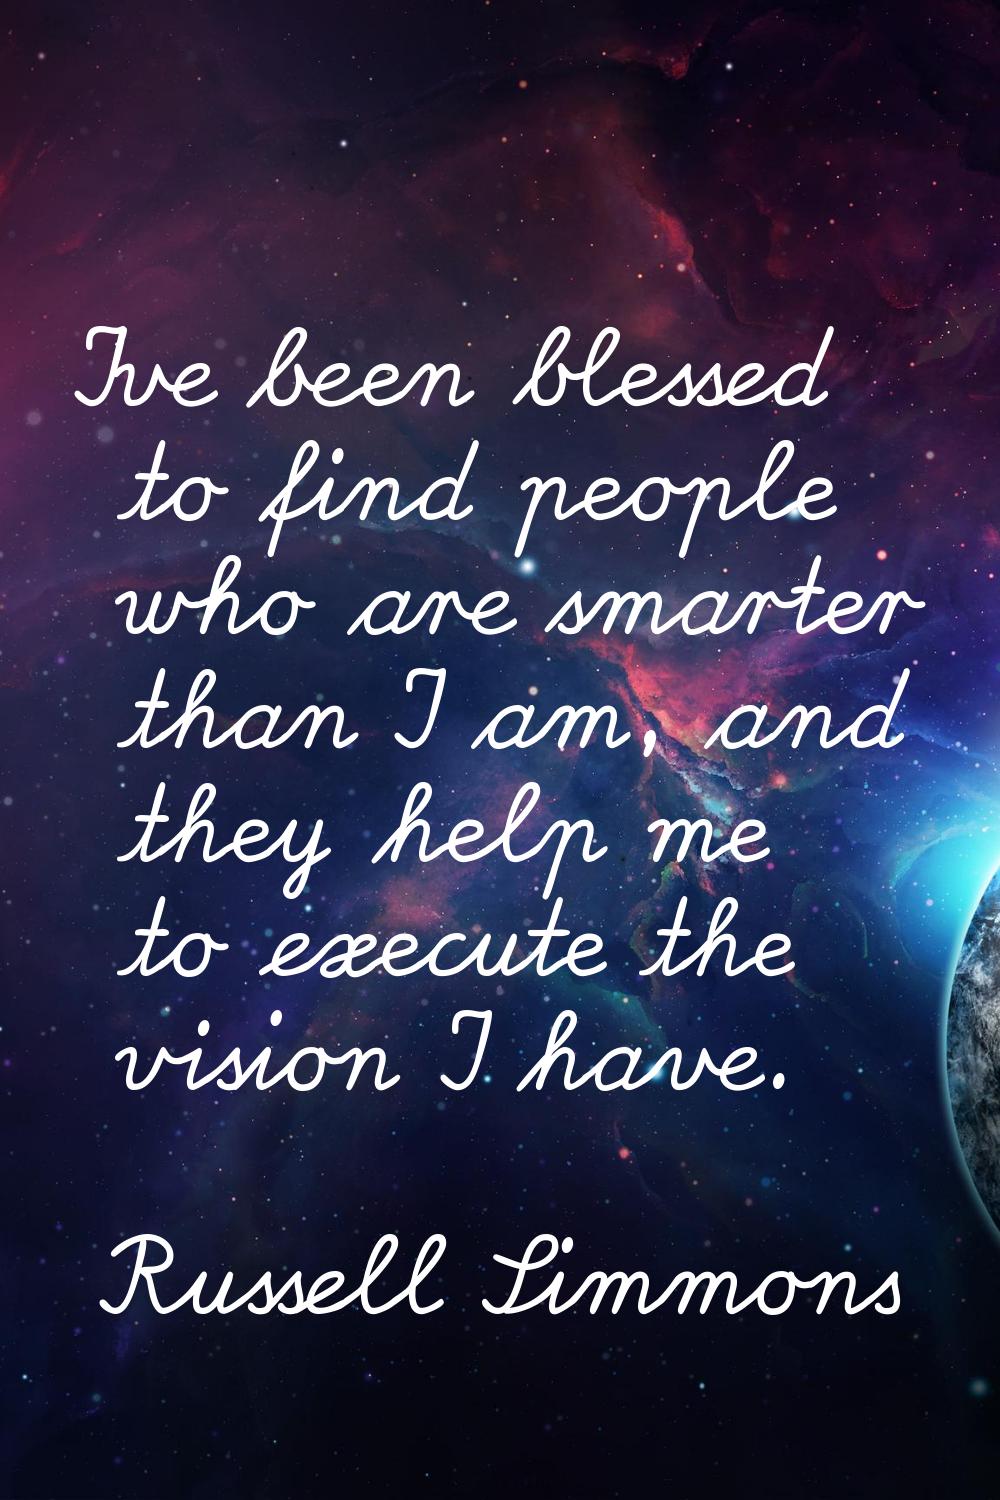 I've been blessed to find people who are smarter than I am, and they help me to execute the vision 